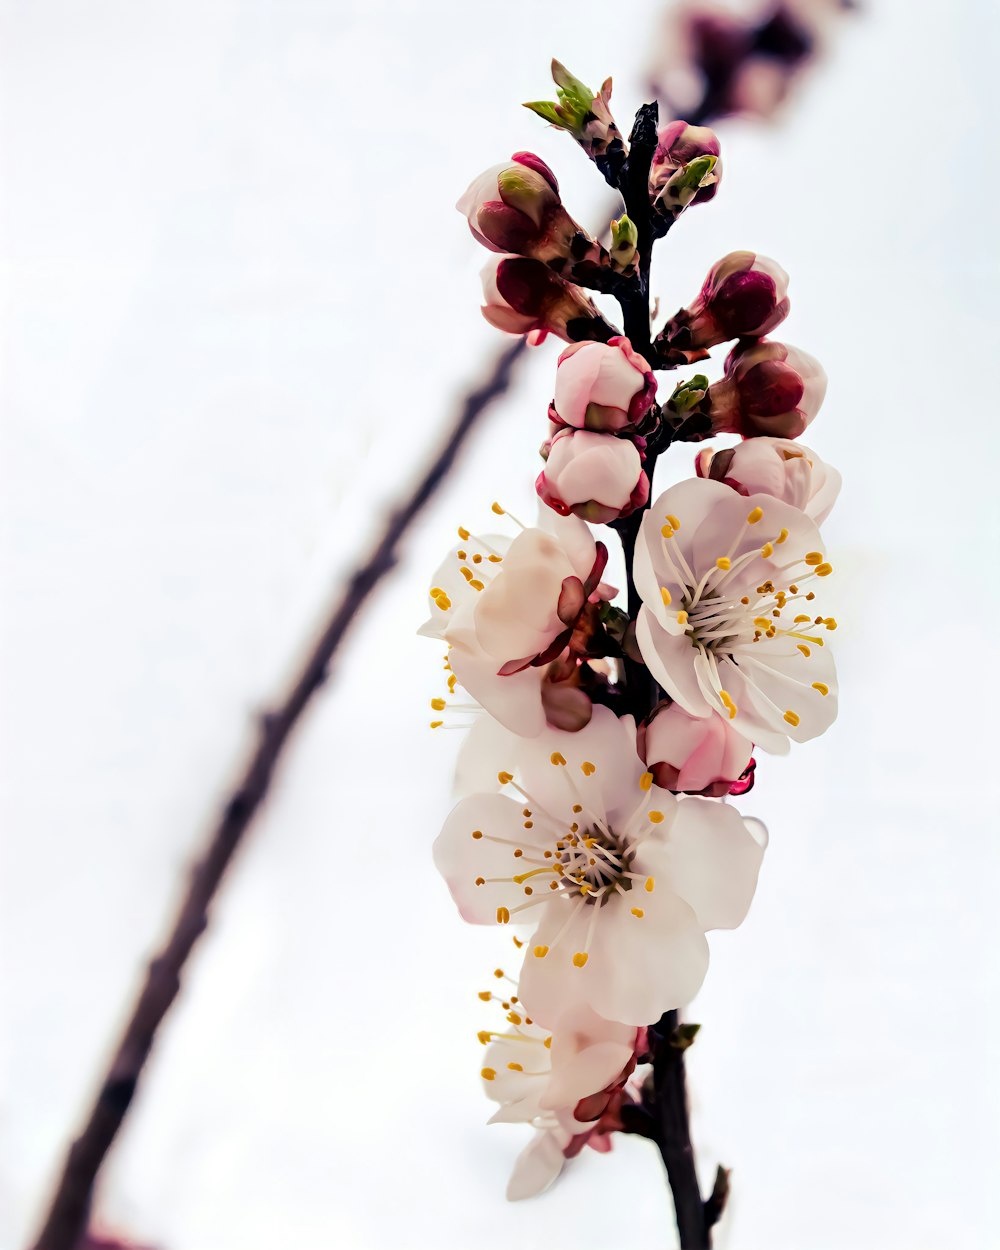 a branch with white and pink flowers on it